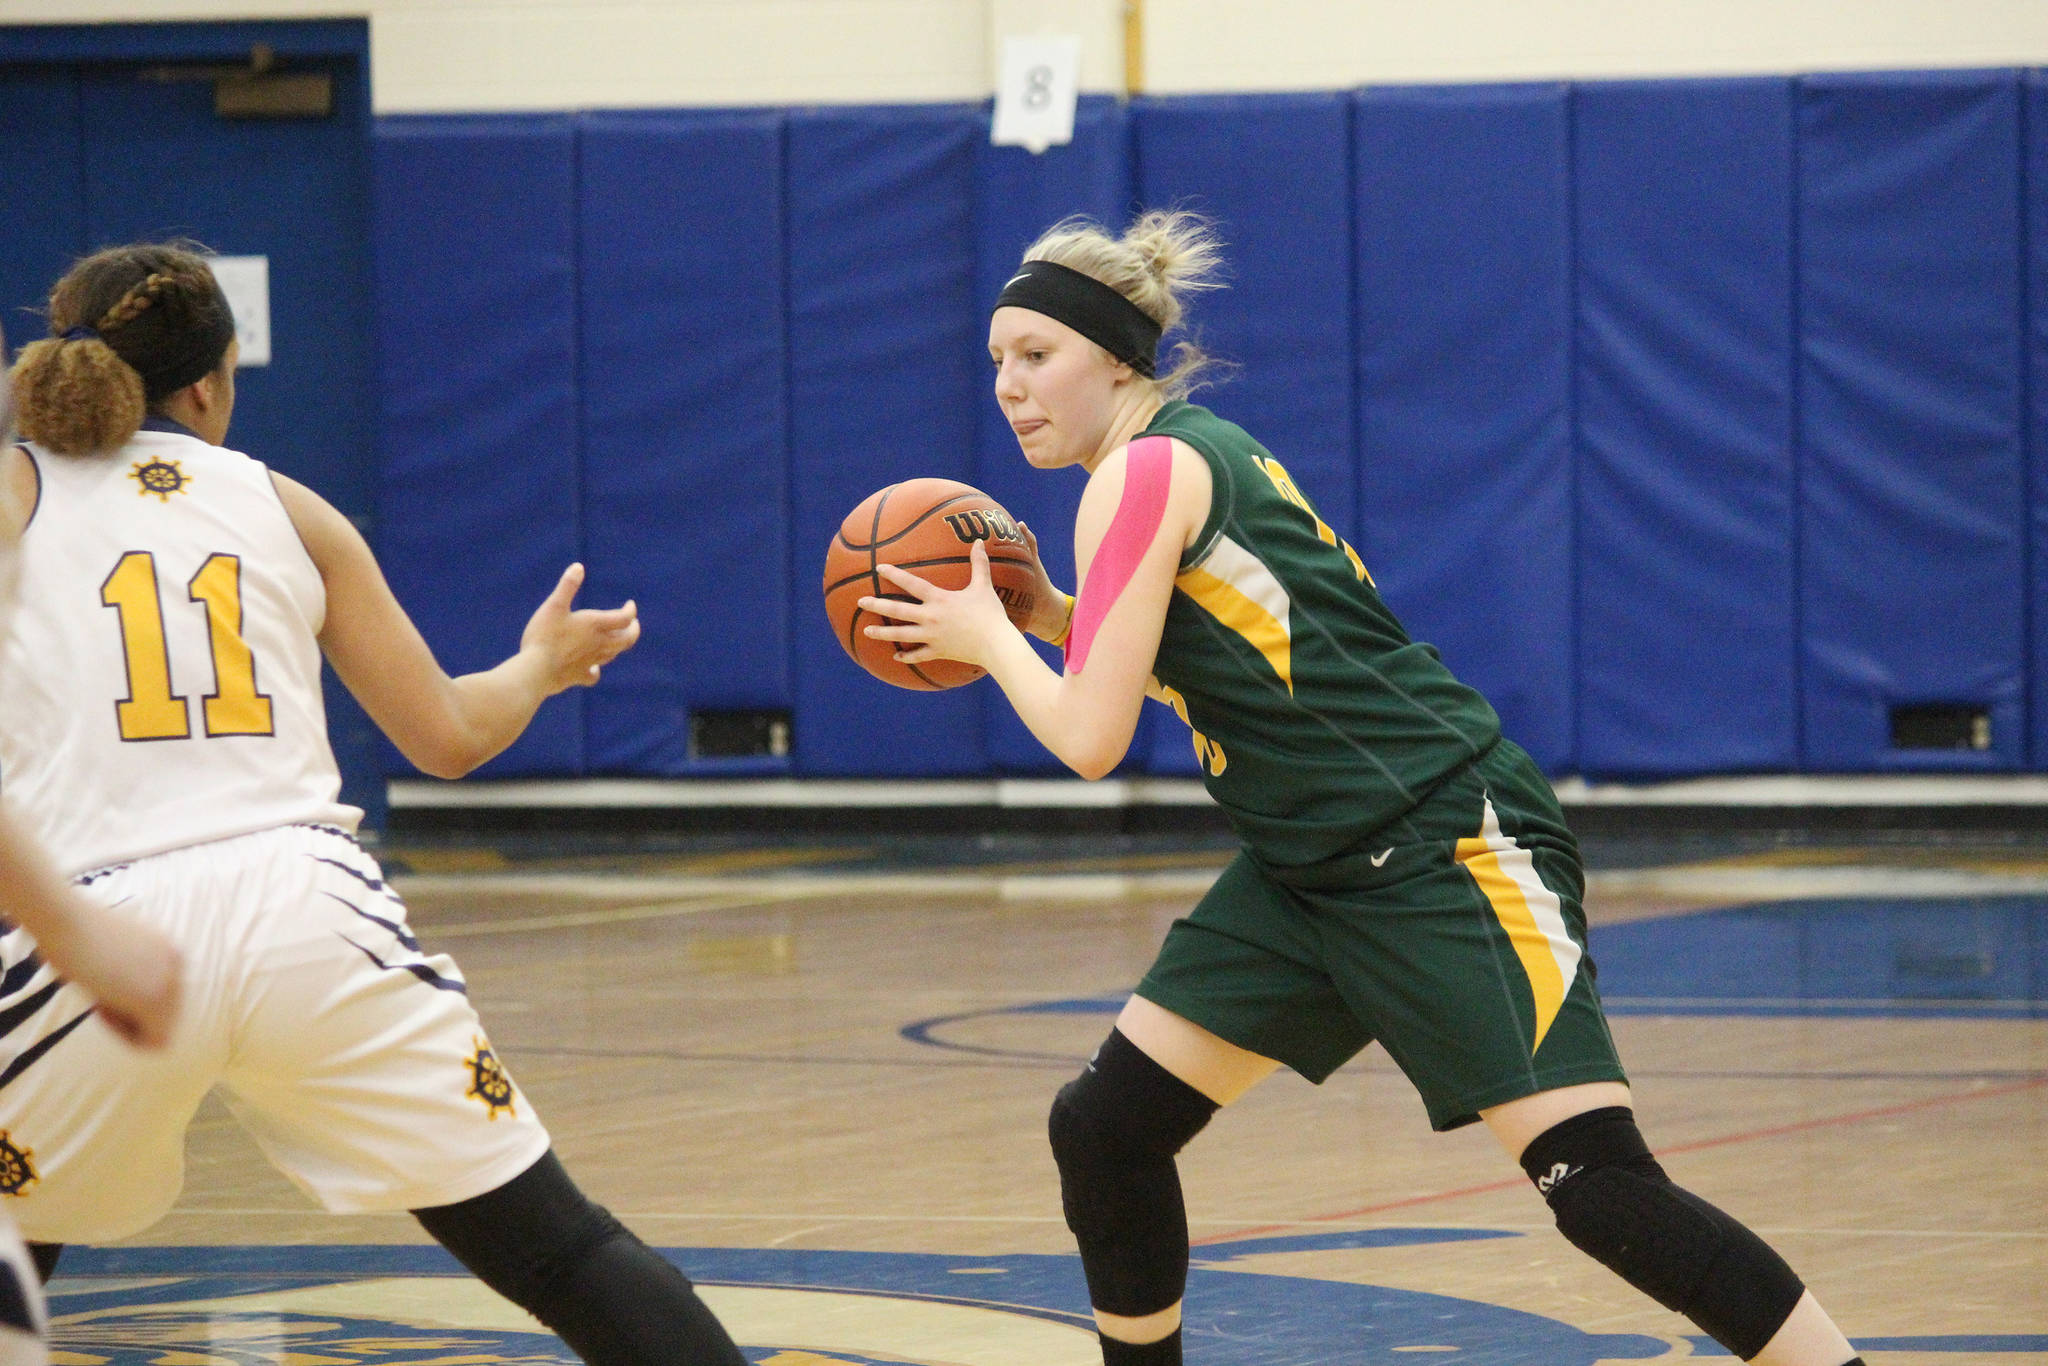 Seward’s Katelyn Lemme looks for a way around Homer’s Alia Bales on Friday, Feb. 8, 2019 during the Winter Carnival Basketball Tournament in Homer, Alaska. (Photo by Megan Pacer/Homer News)